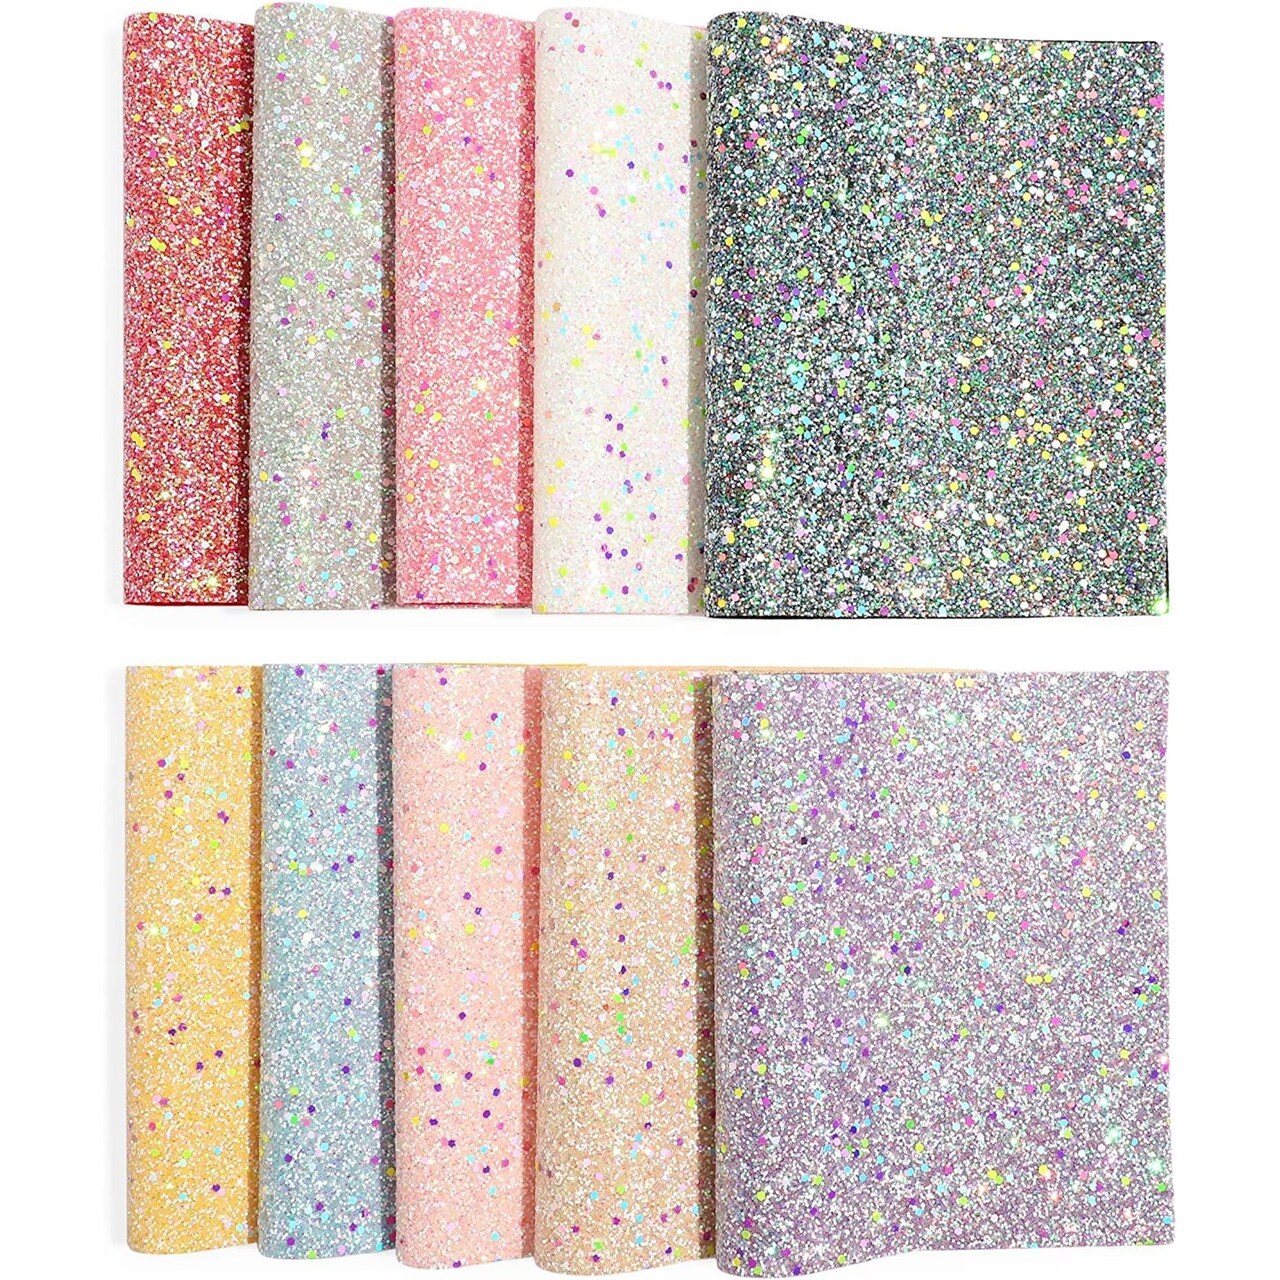 Faux Leather Sheet for Crafts, Glow in The Dark Glitter (10 Pack